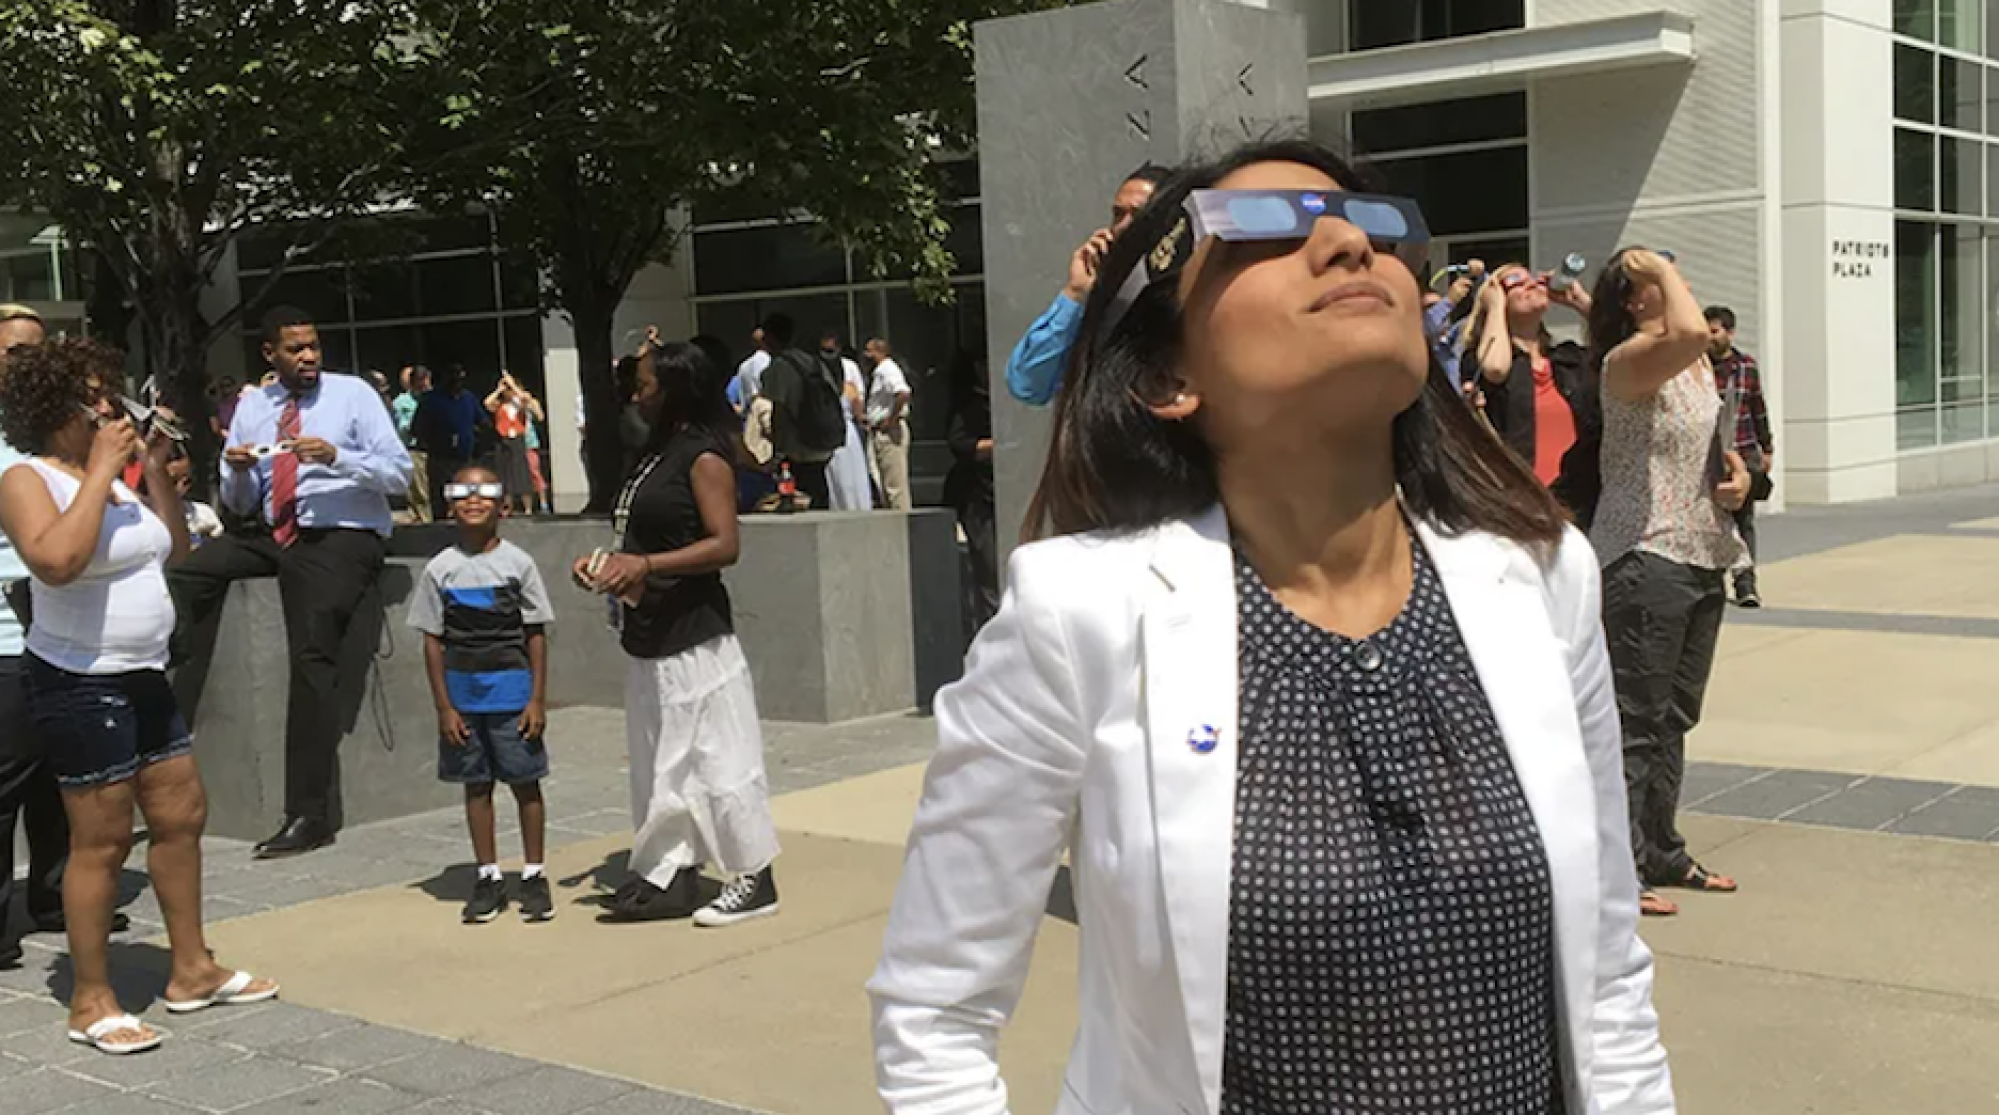 Make sure to view a solar eclipse with approved eclipse glasses.